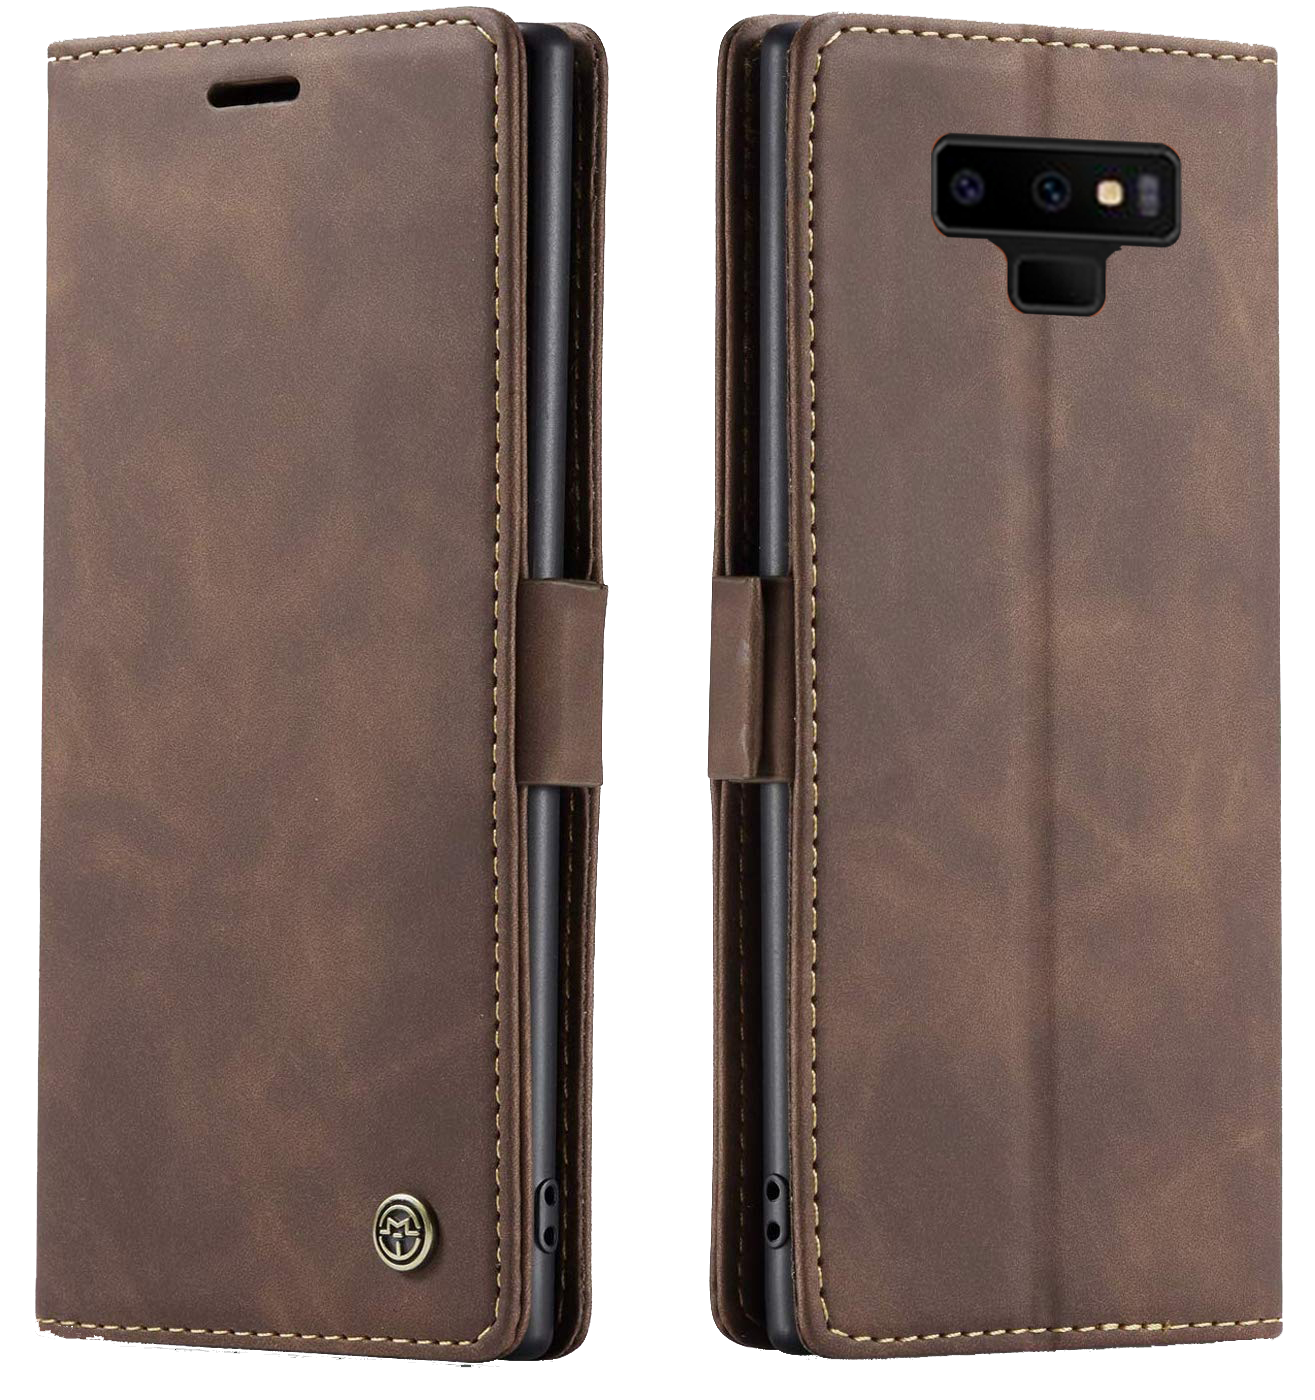 Samsung Galaxy Note 9 coffee color leather wallet flip cover case By excelsior